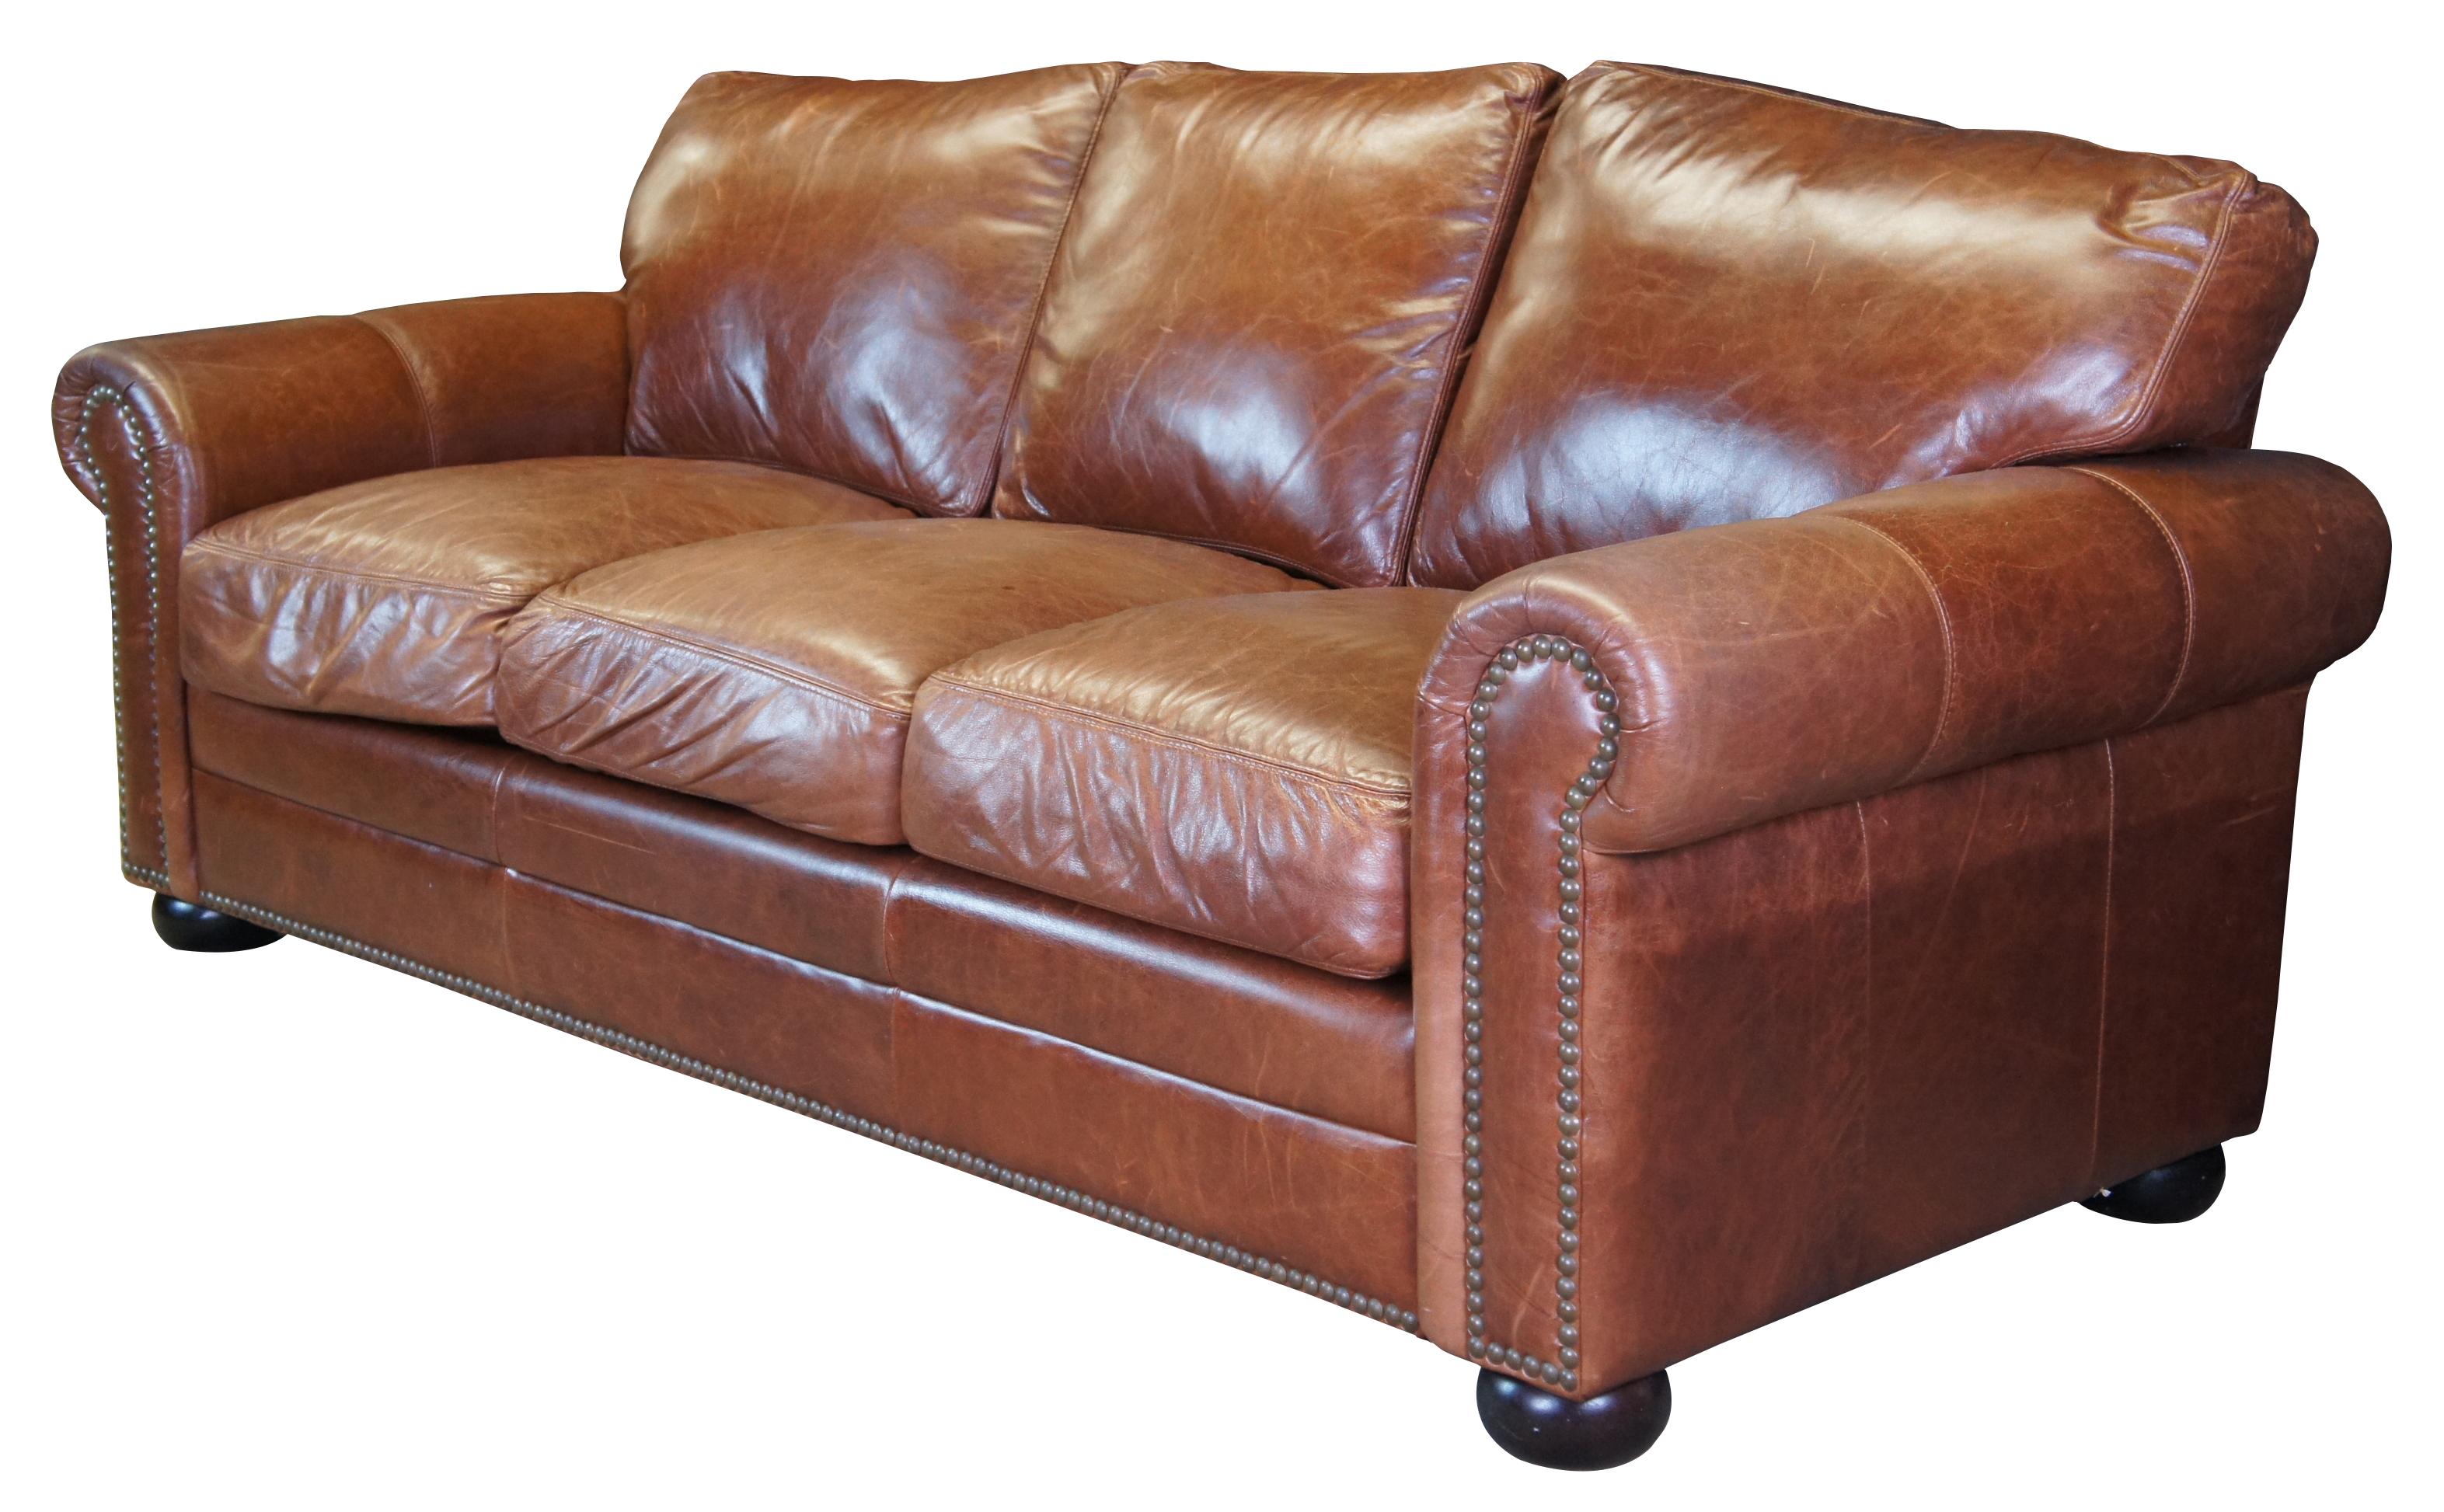 The Omnia Savannah Leather 3 Seat Sofa.  Traditional form with rolled arms and bun feet.  Features individually placed touching nail heads along the front arm panels and along bottom of front panel.  Bun feet finished in Expresso finish.  Ideal for